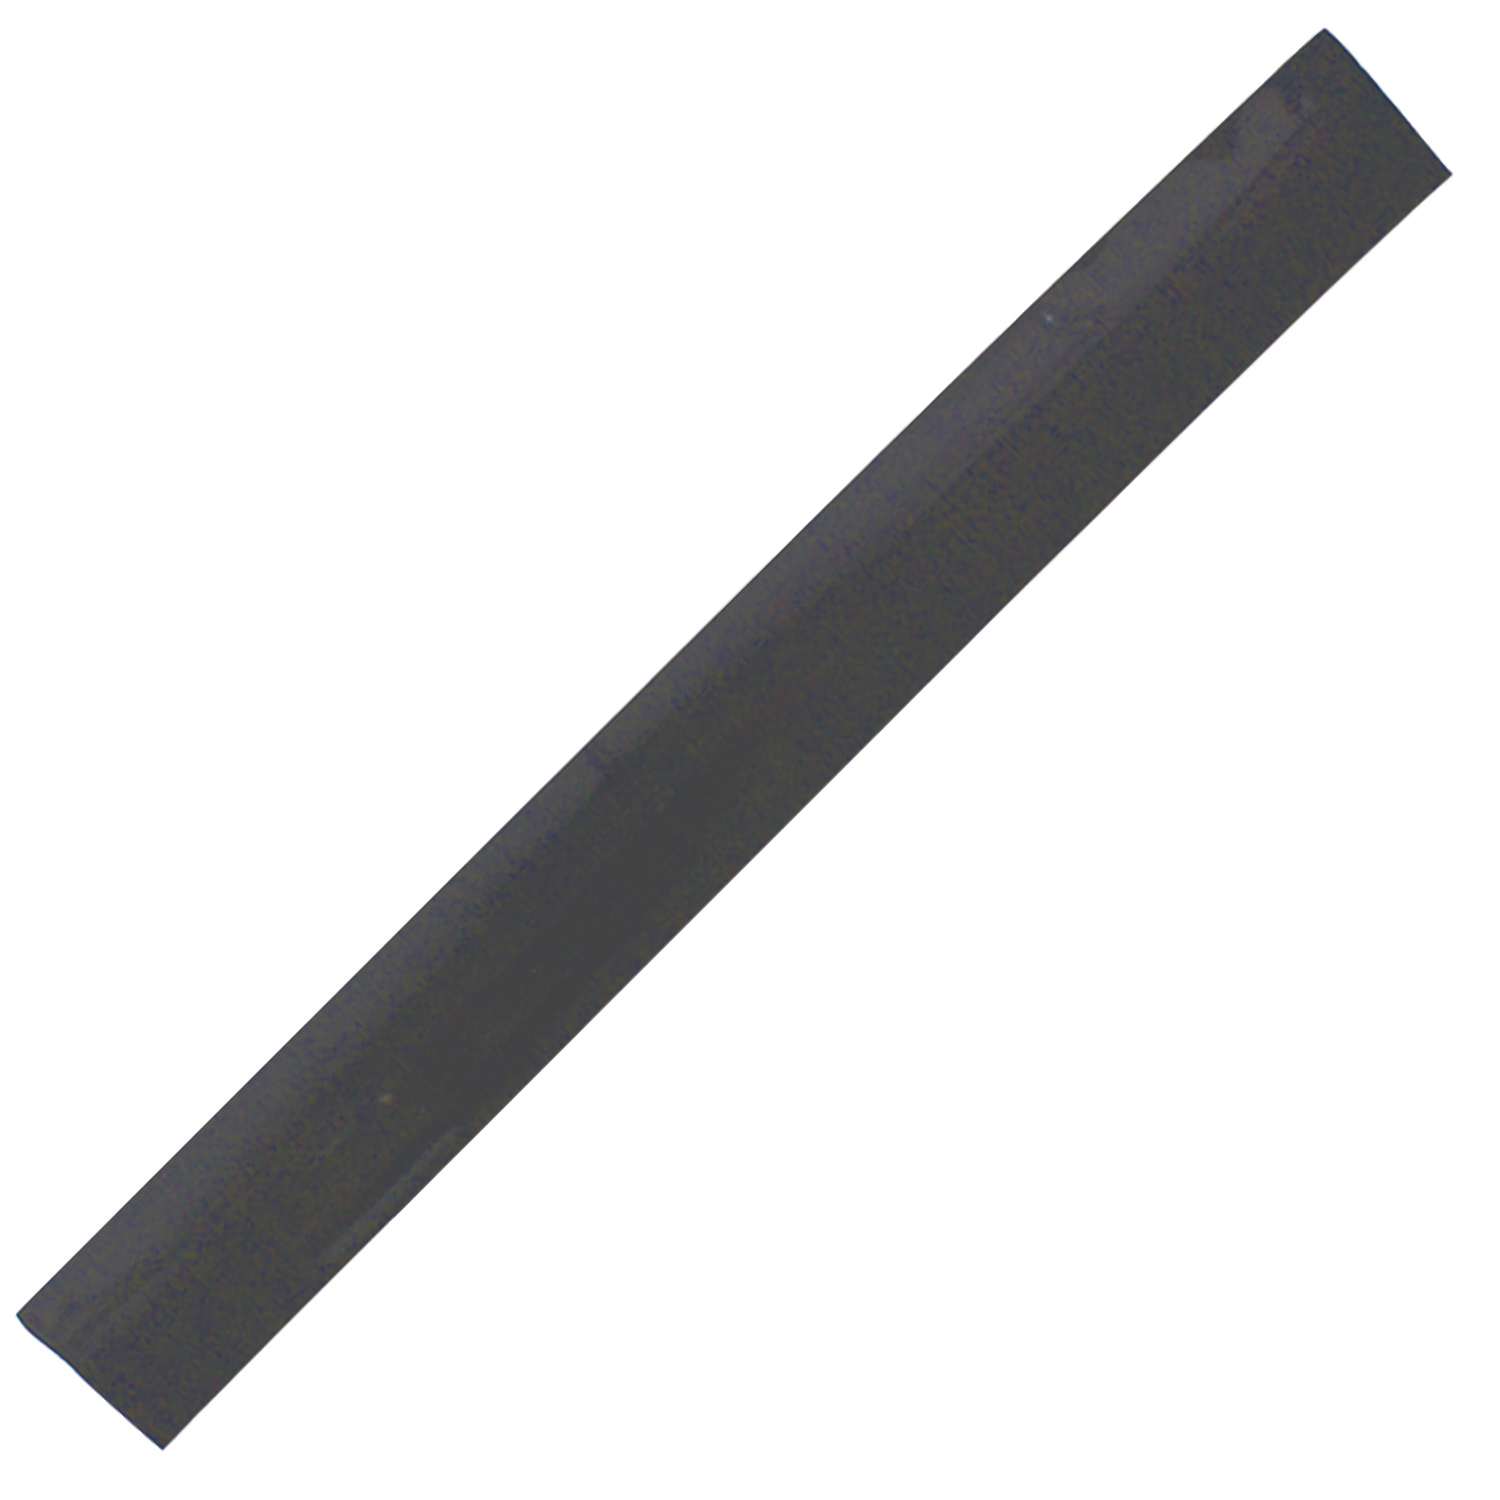 Range Kleen 1 Piece Black Silicone Kleen Seam, 20.5 inches long - image 1 of 5